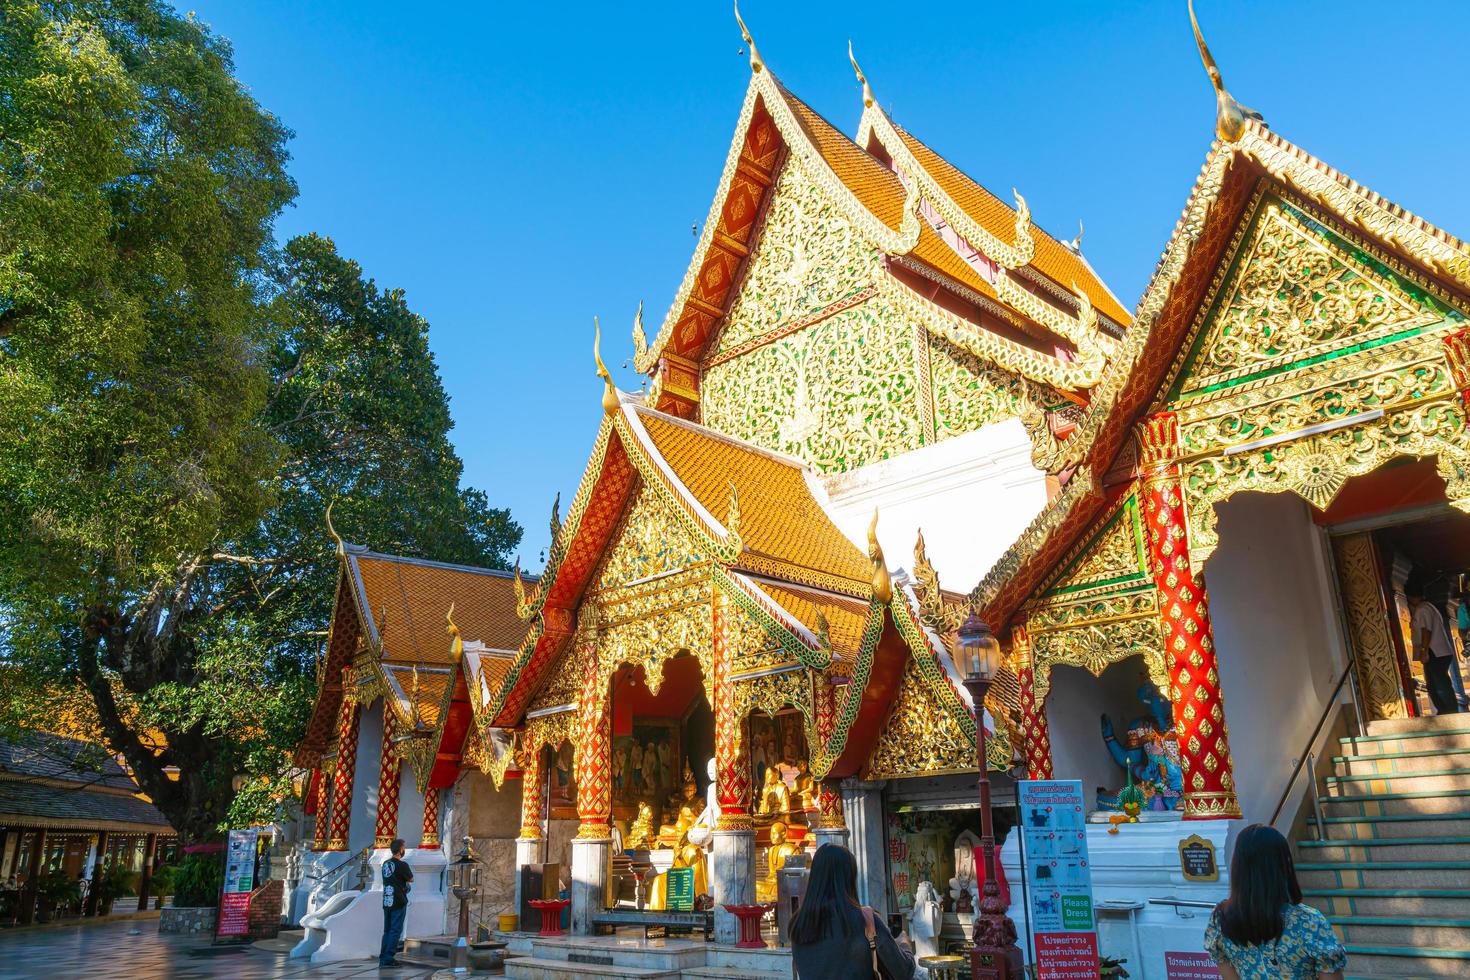 Chiang Mai, THAILAND - DEC 8, 2020 - Golden mount at the temple at Wat Phra That Doi Suthep. photo